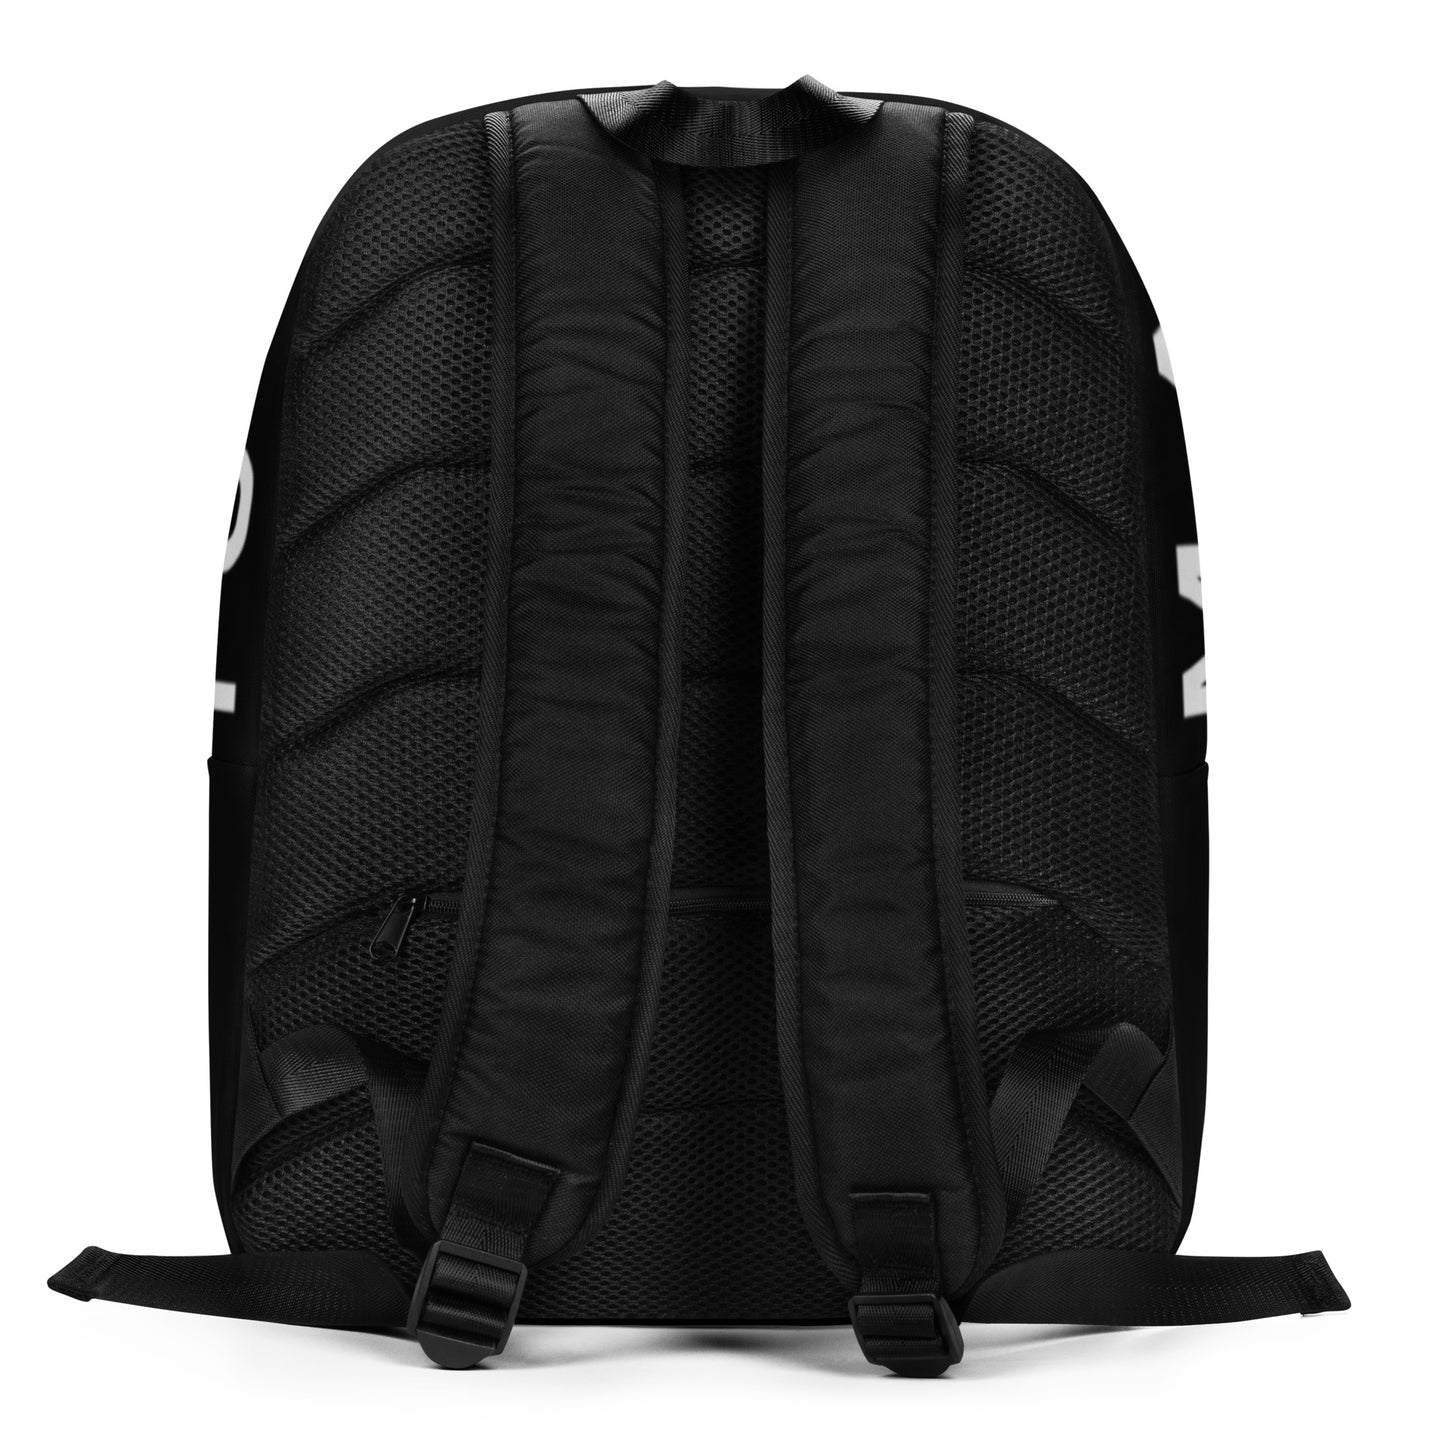 Perspective. Dura-Light Backpack